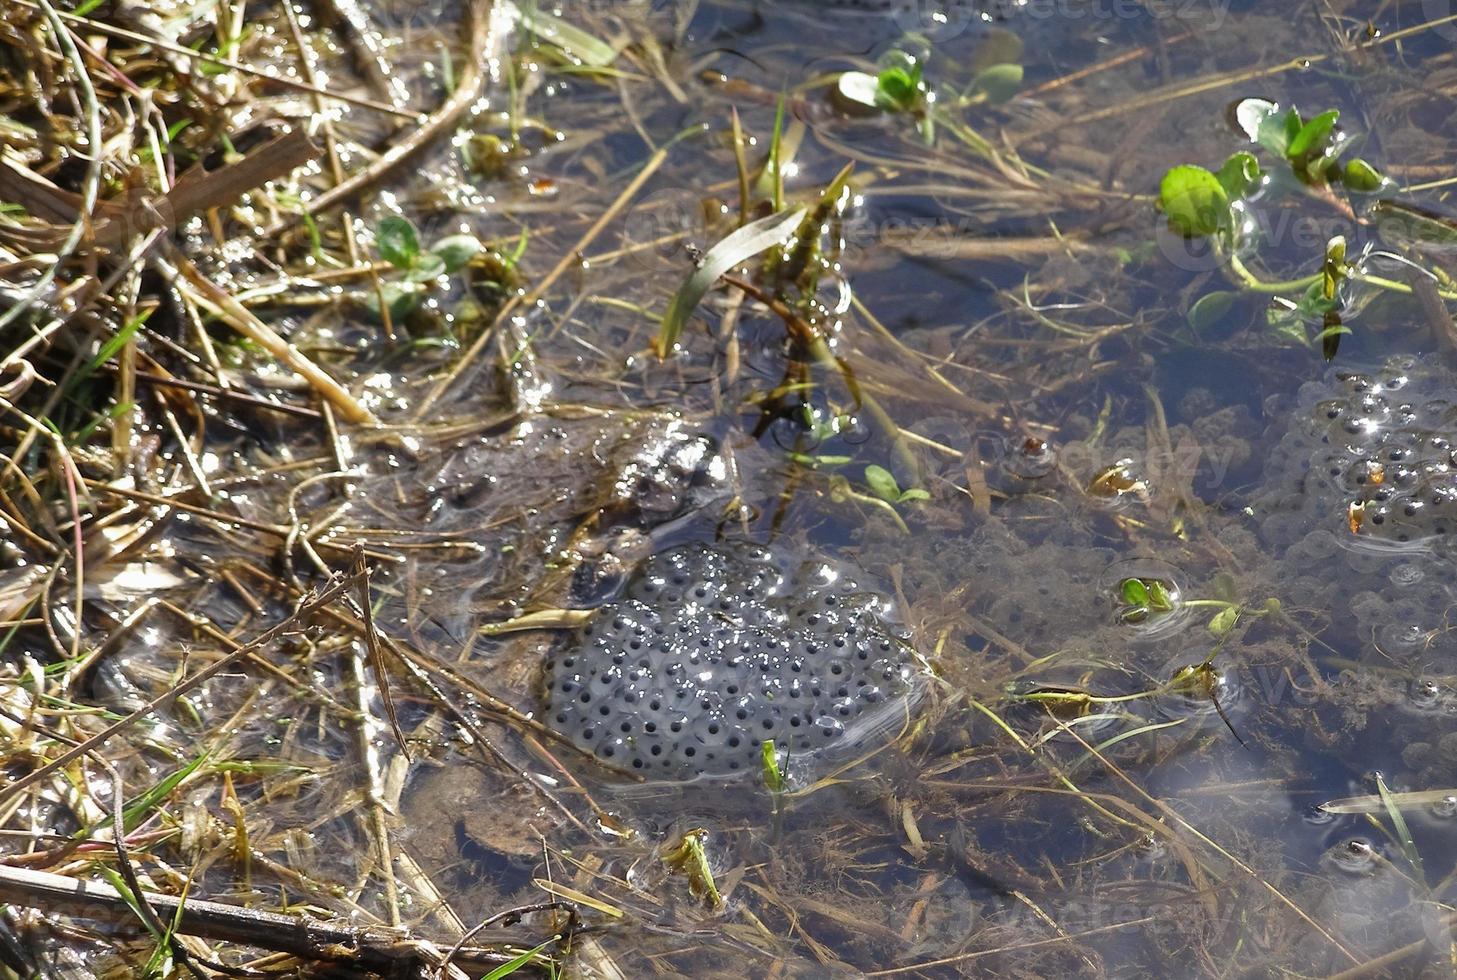 Frog eggs in pond photo